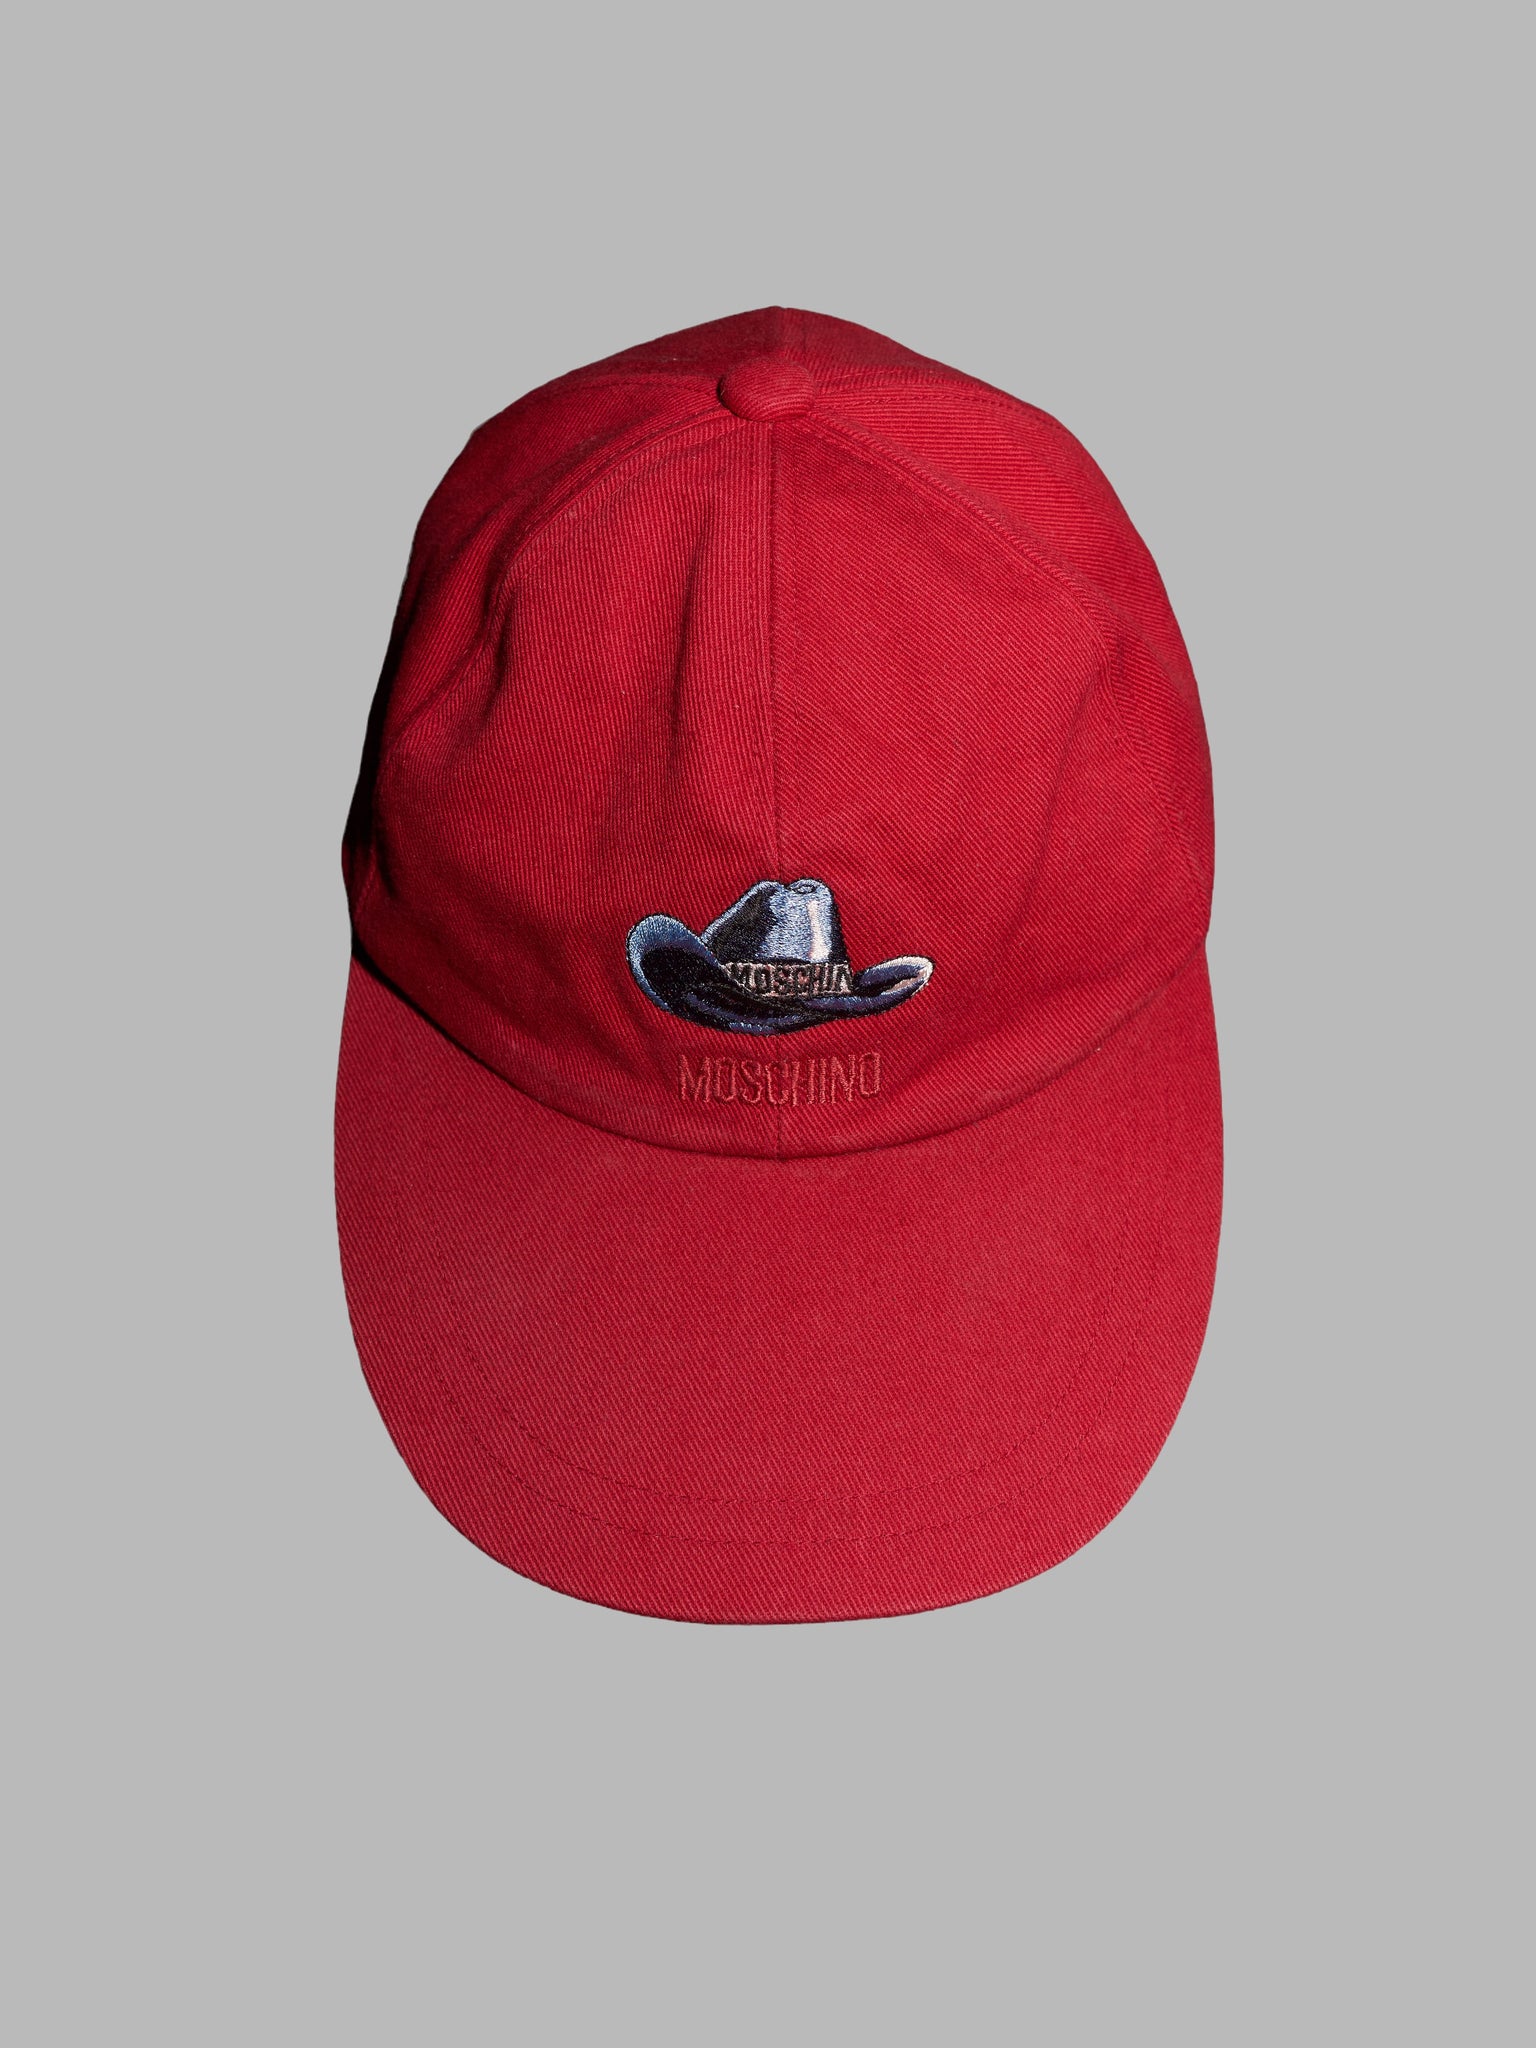 Moschino Cheap and Chic 1990s red adjustable embroidered cowboy hat baseball cap